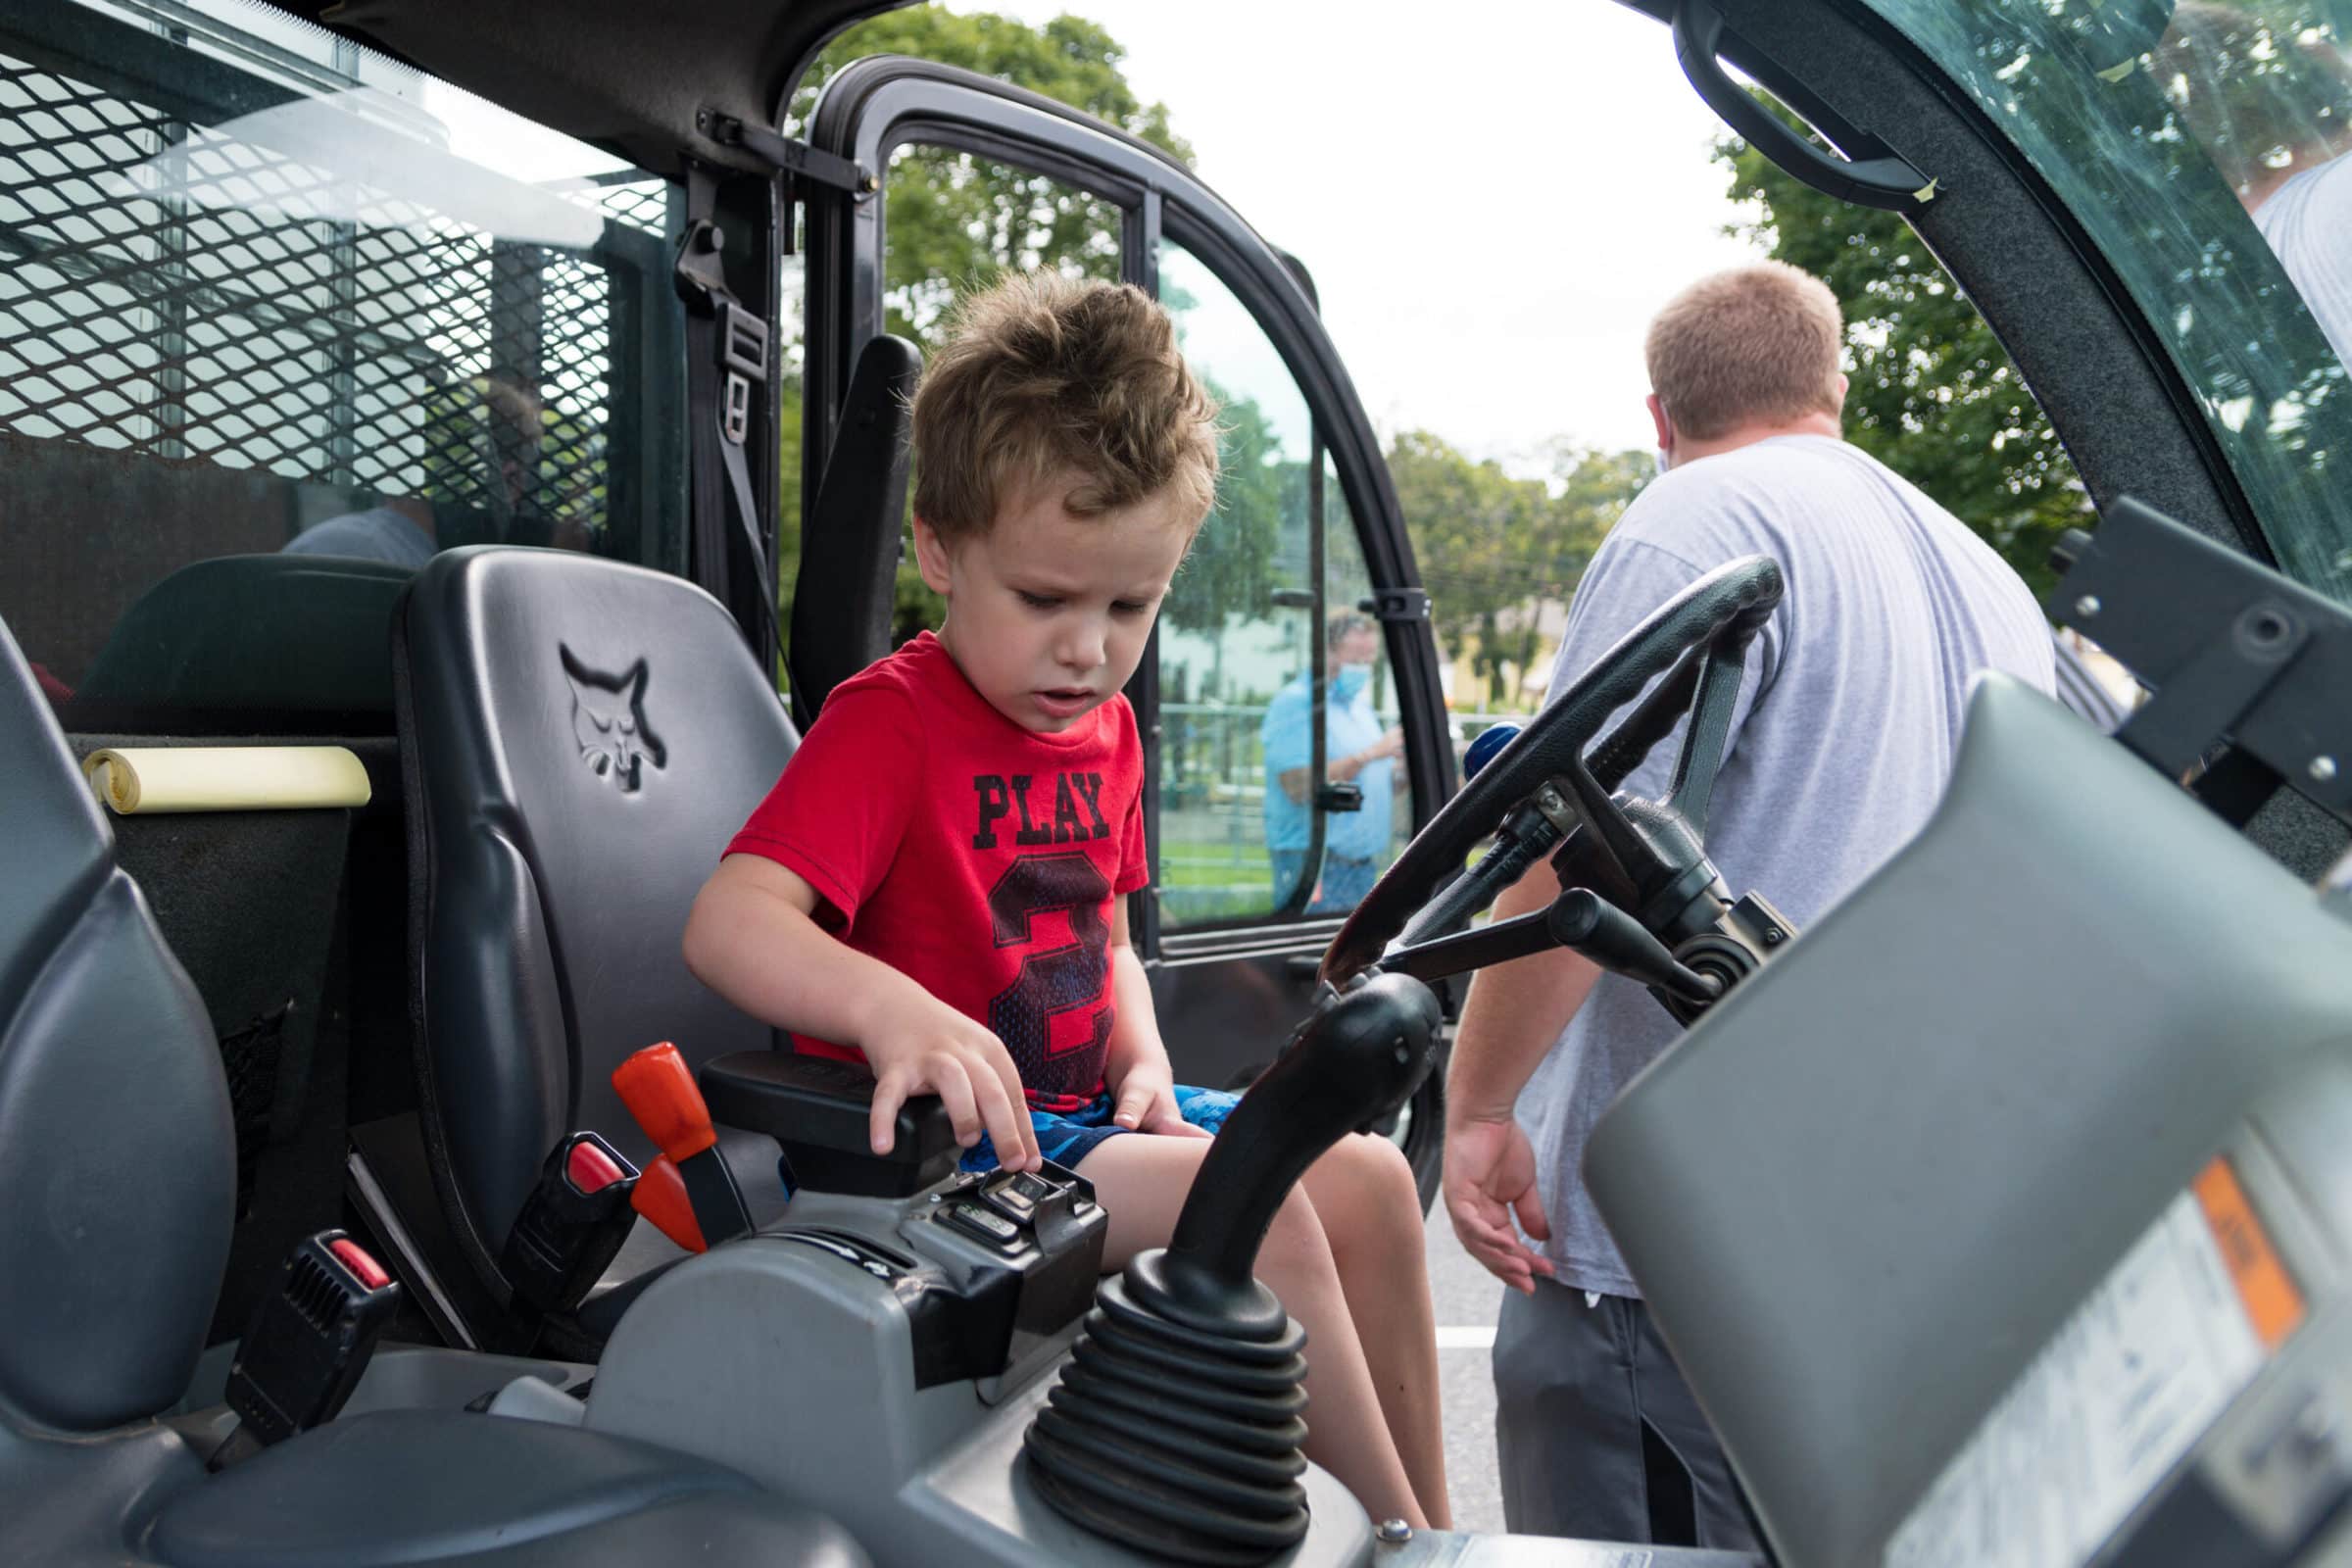 A child explores the cab of a Marlborough DPW vehicle during a ‘touch-a-truck’ event, July 29. (Photo/Jesse Kucewicz)